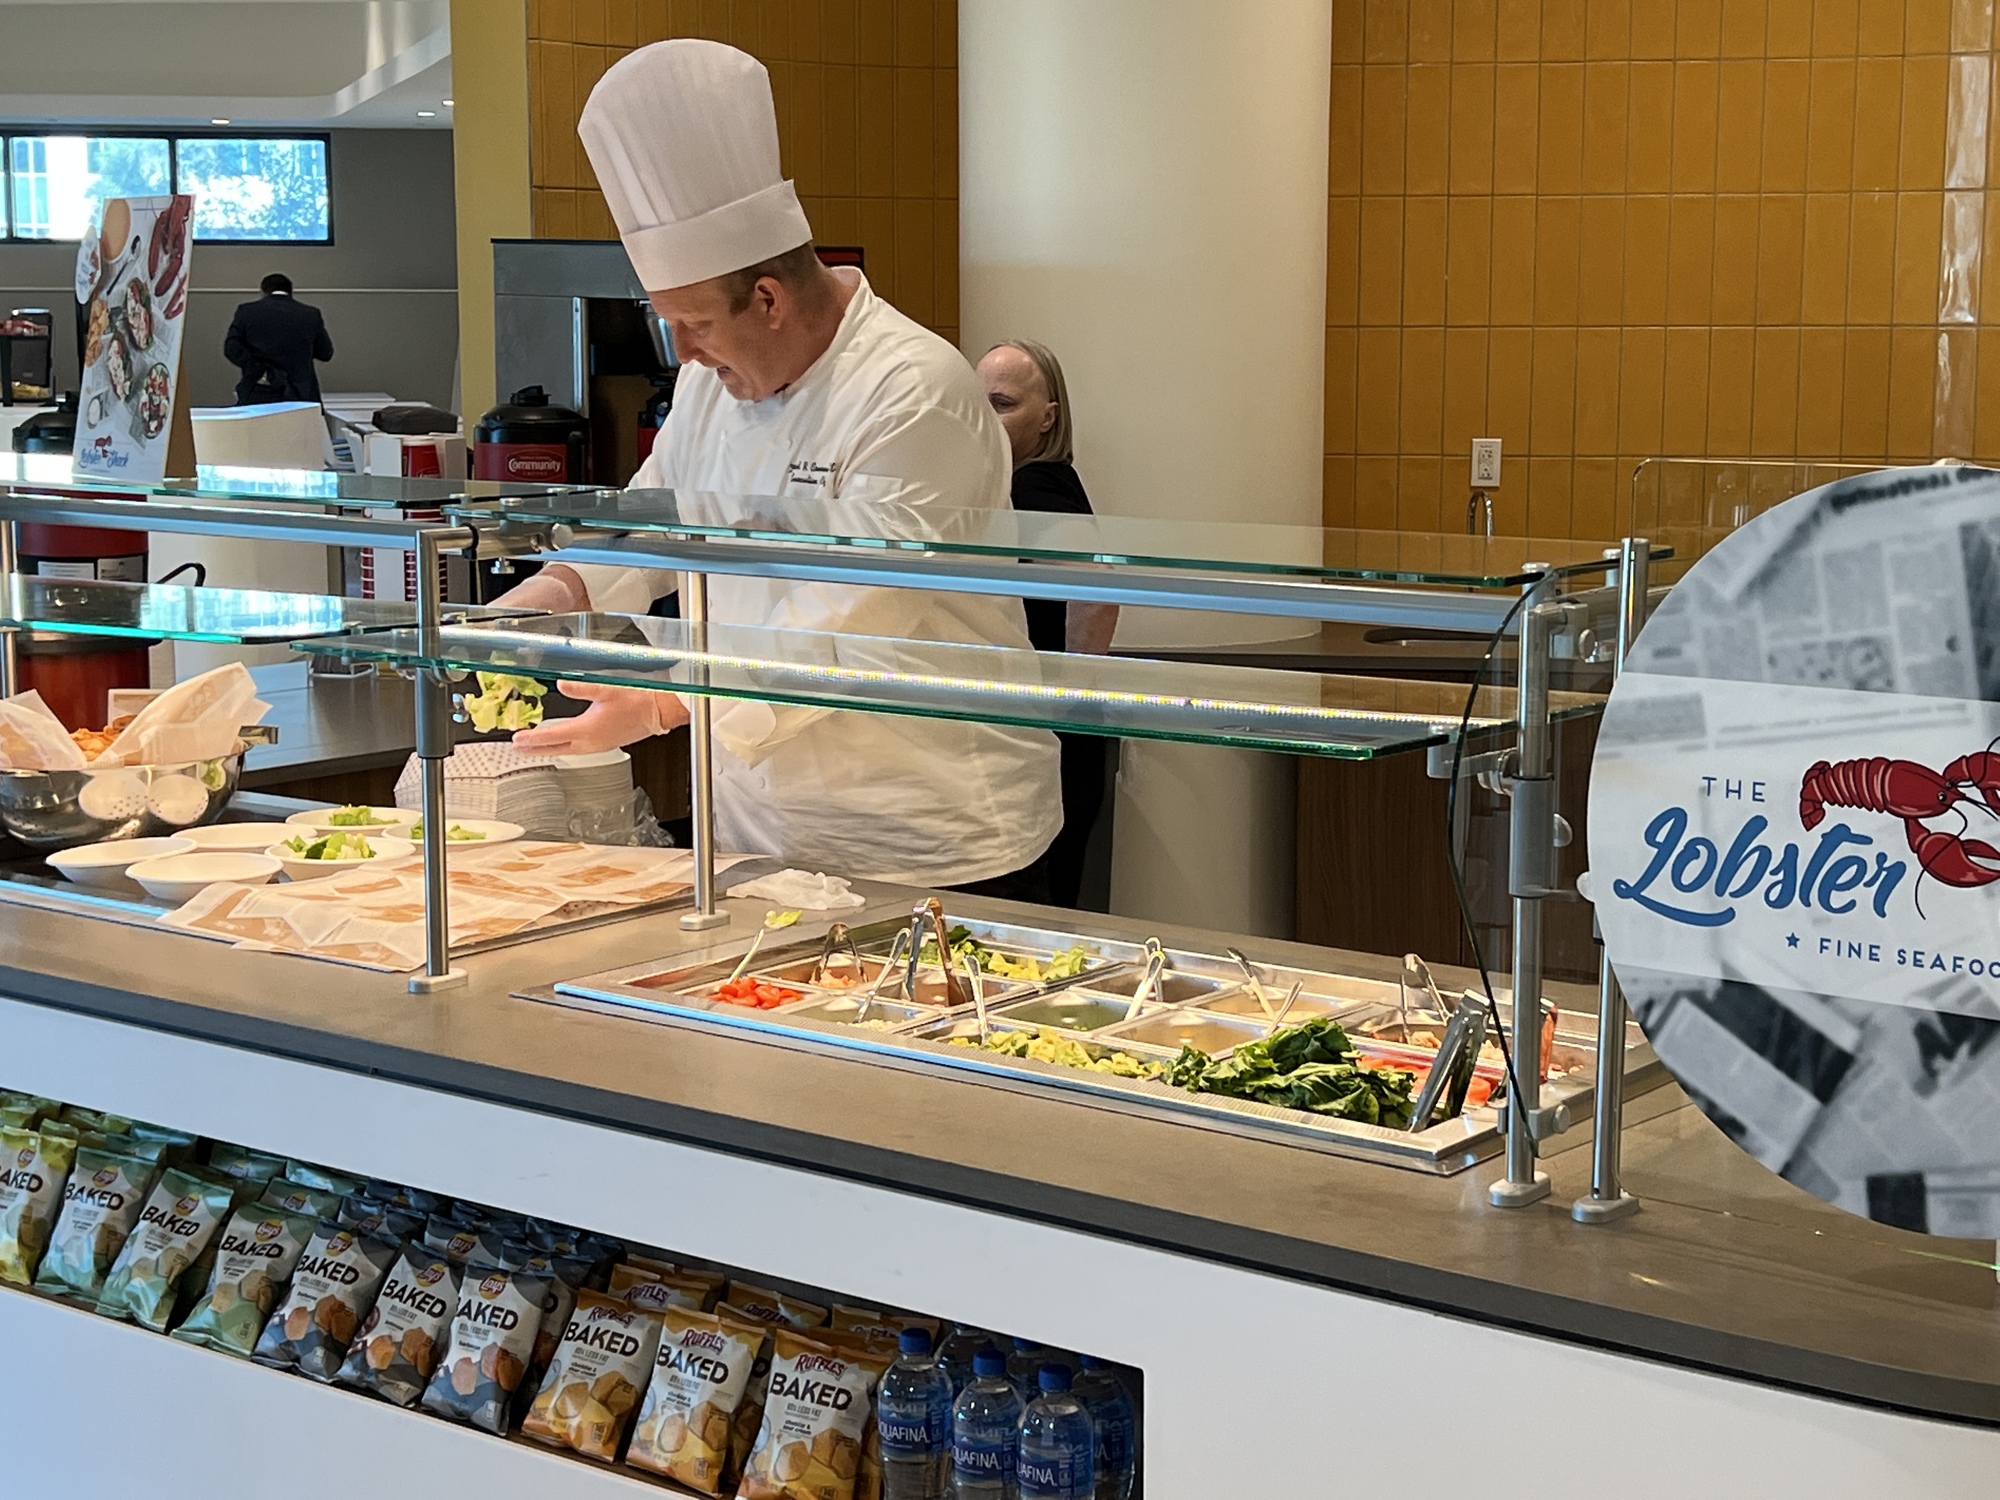 Executive Chef Daniel Conroy will prepare items at the Baptist Medical Center Clay cafeteria not typically found on a hospital menu. Opening day featured lobster salad.